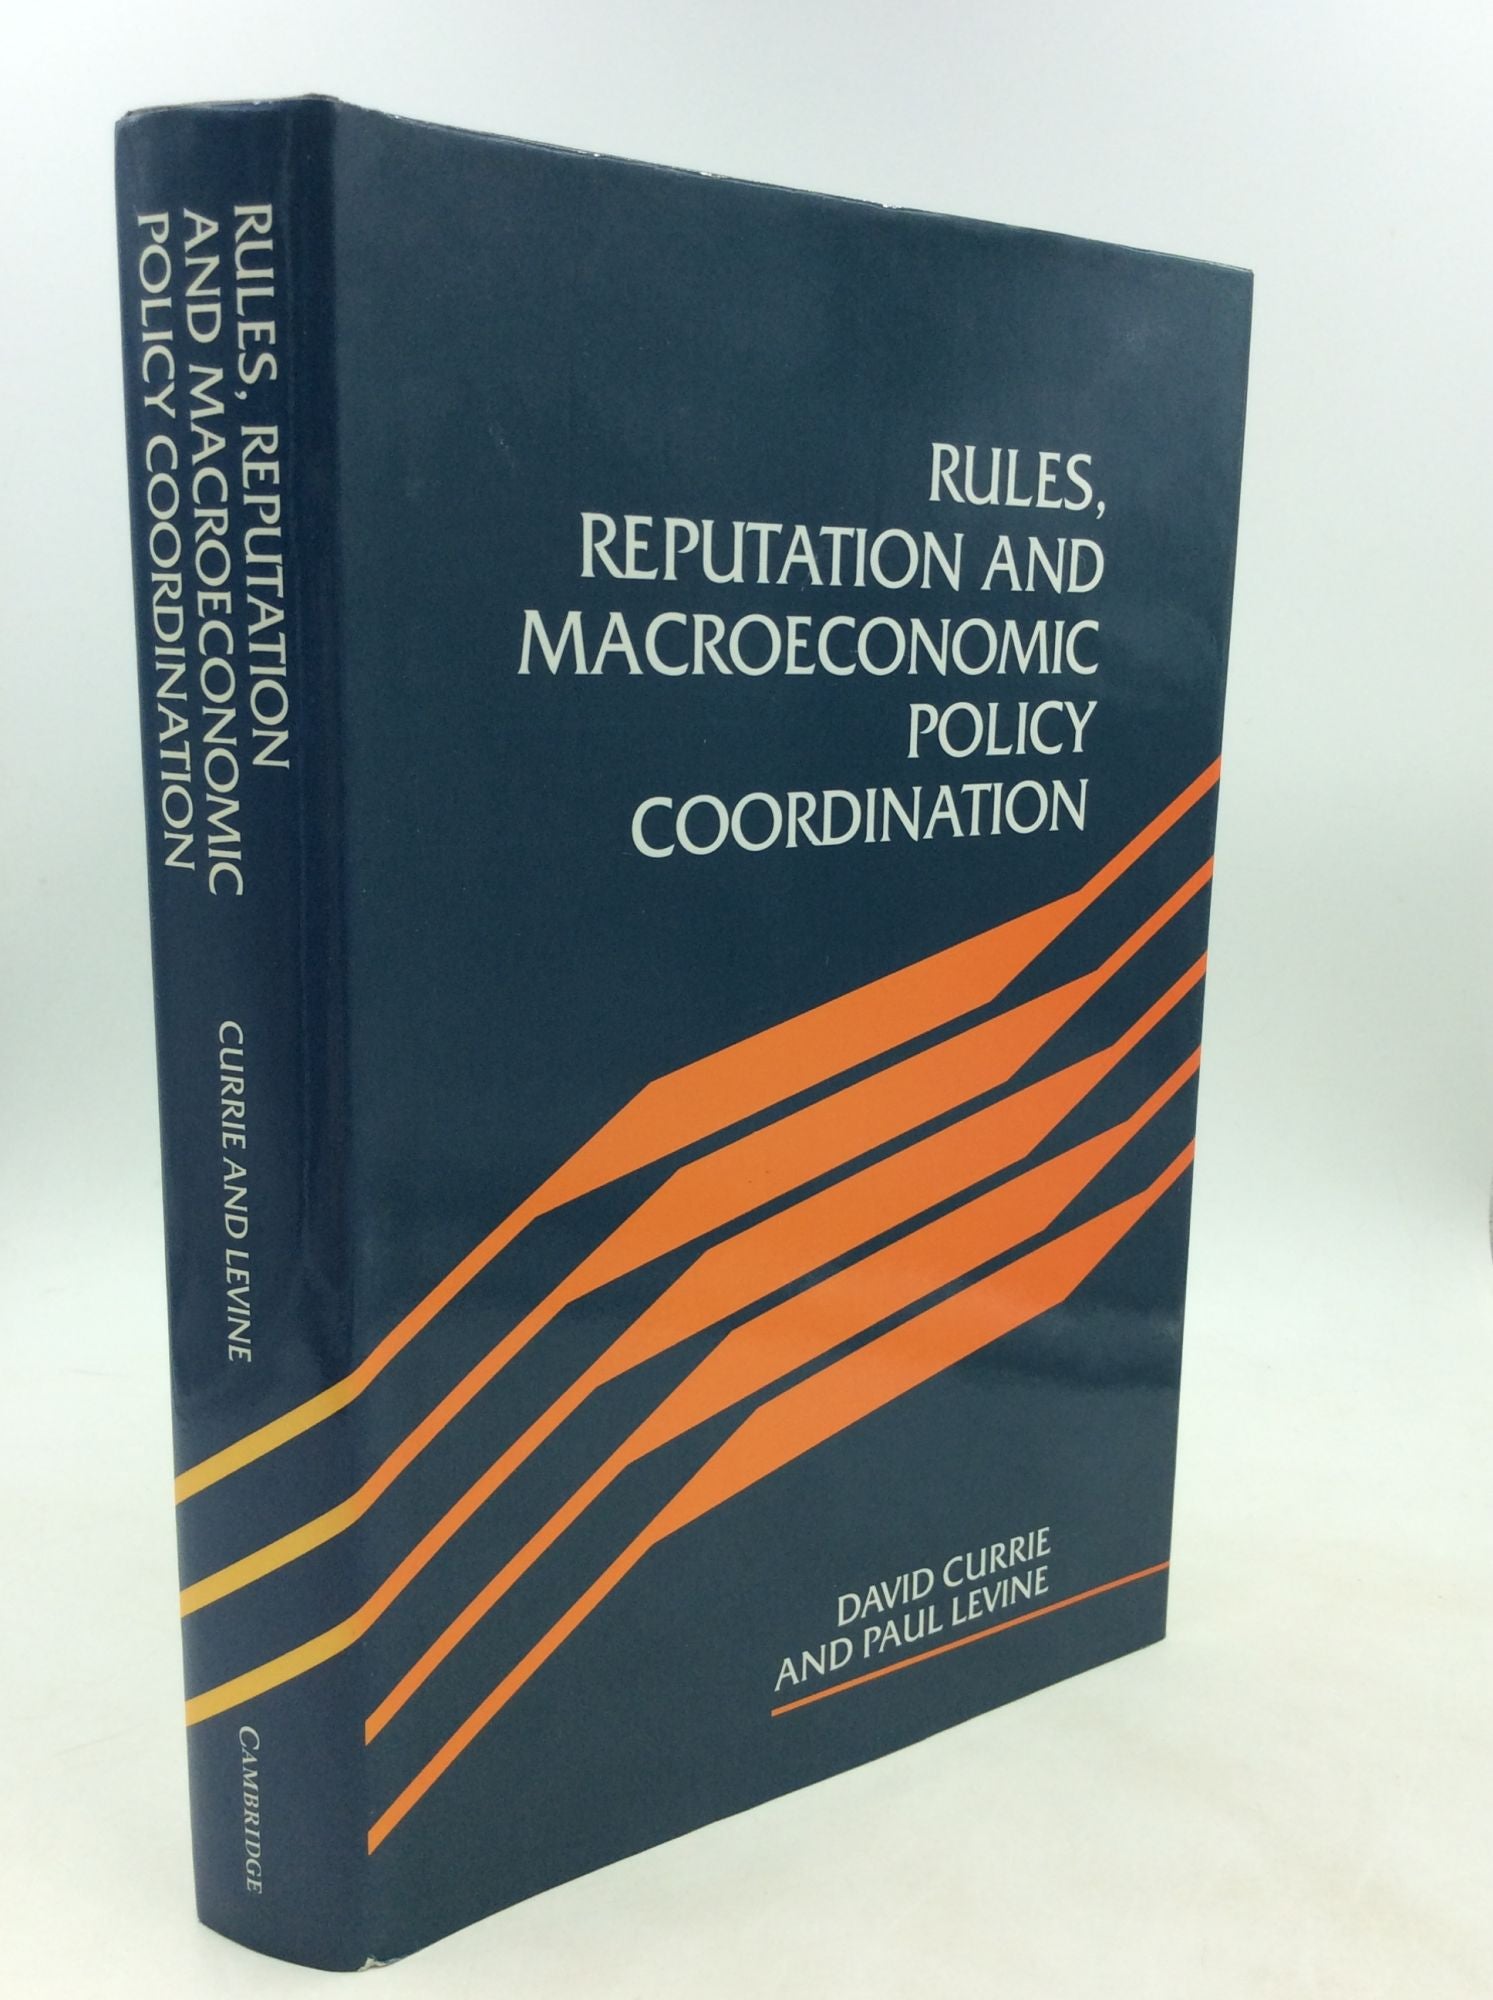 David Currie & Paul Levine - Rules, Reputation and Macroeconomic Policy Coordination